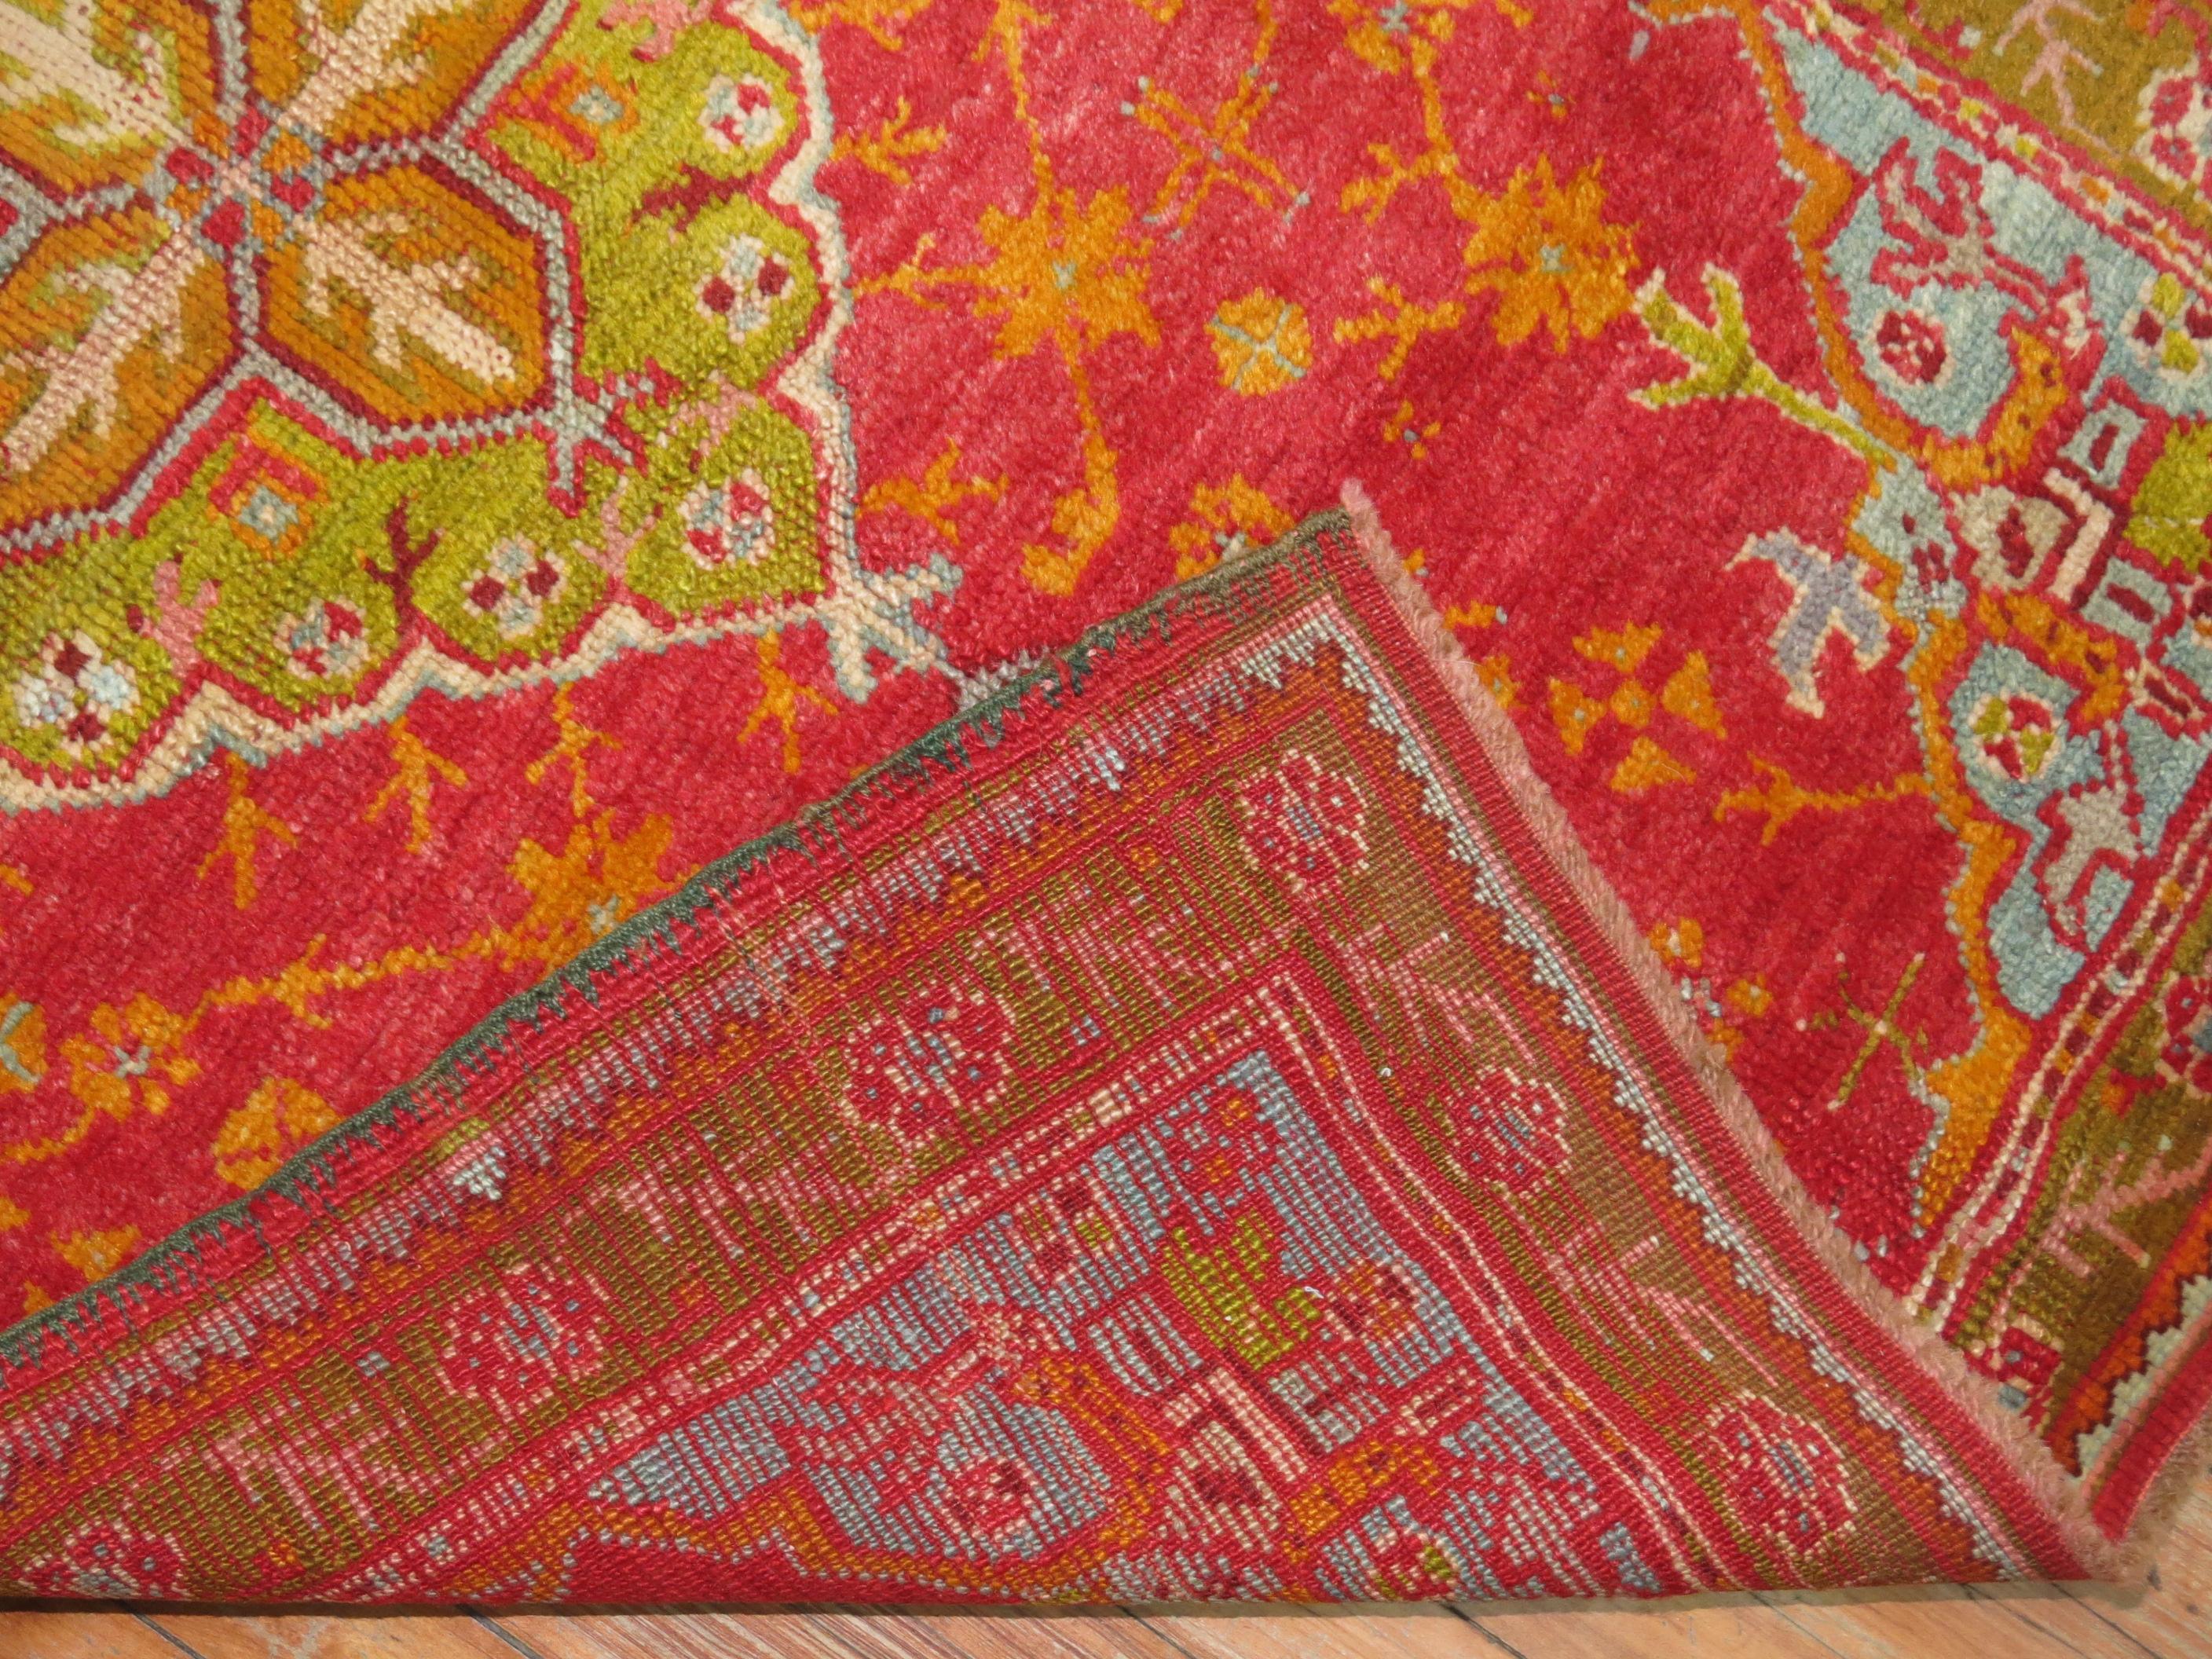 Wonderful one of a kind, handmade, early 20th century Oushak with cheerful colors.